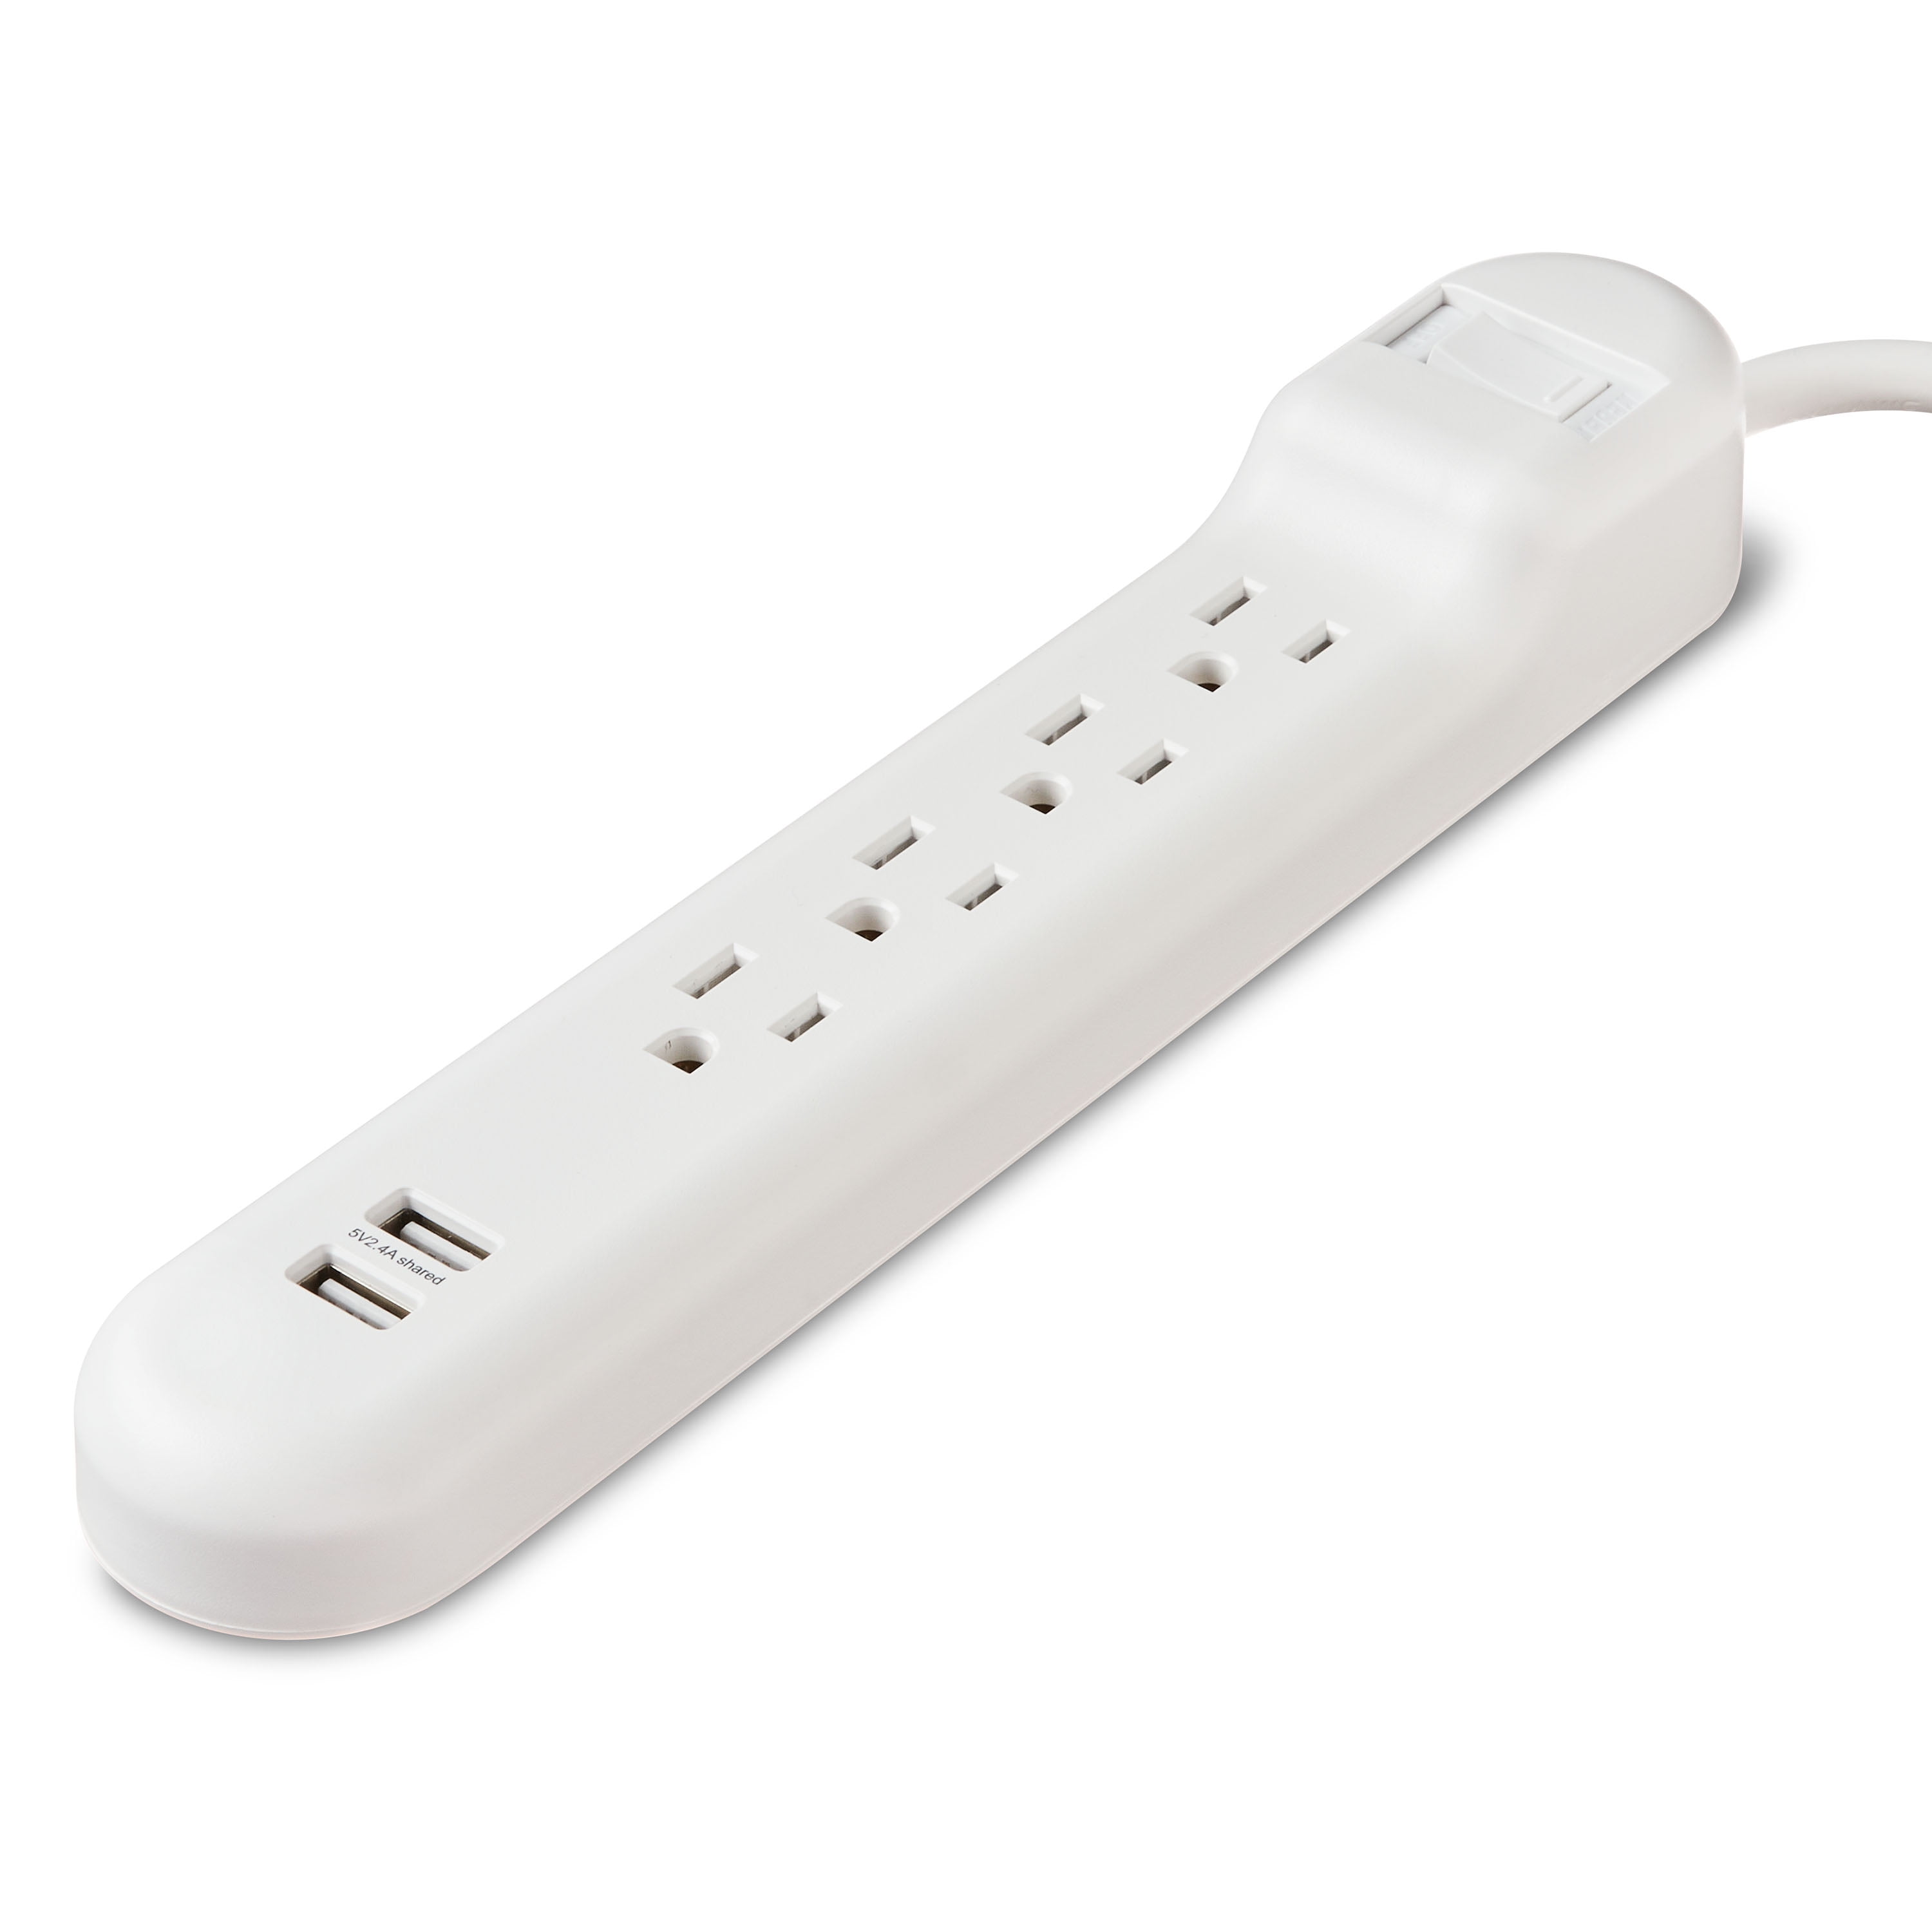 onn. 2.5ft 4outlets Surge Protector with 2 USB Ports-White color